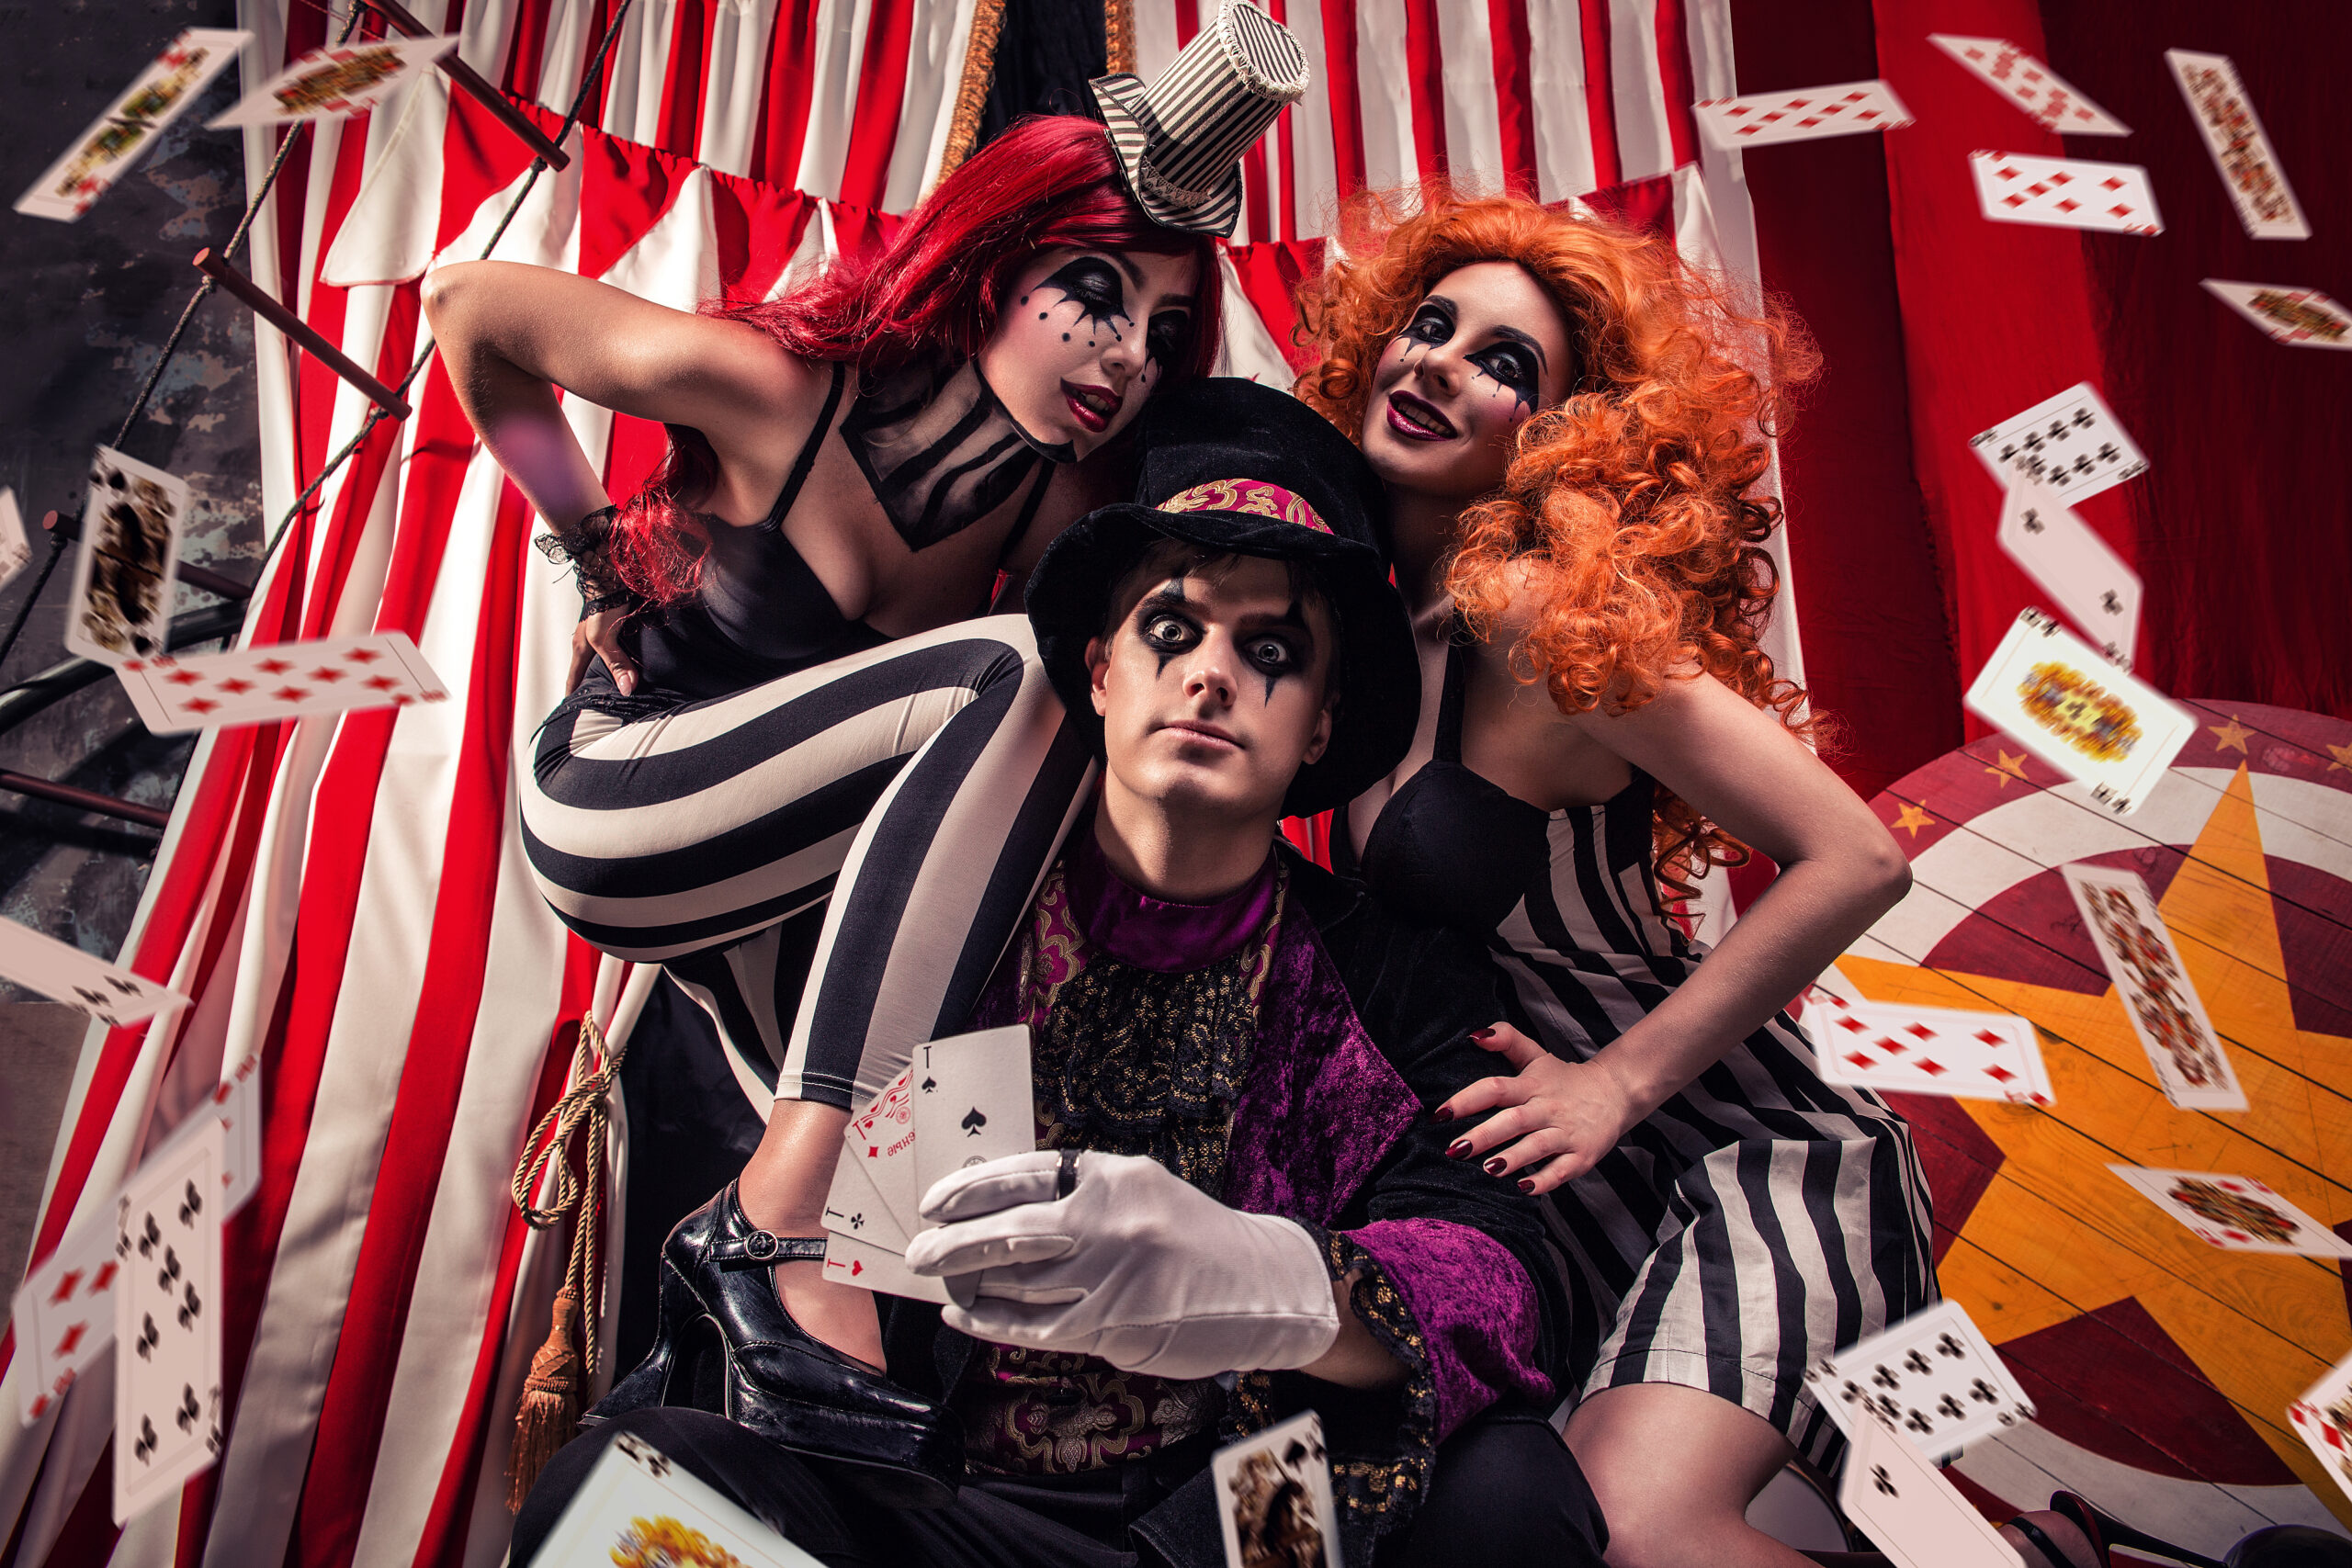 Coming soon: Cirque du Y – The fundraiser with a twist